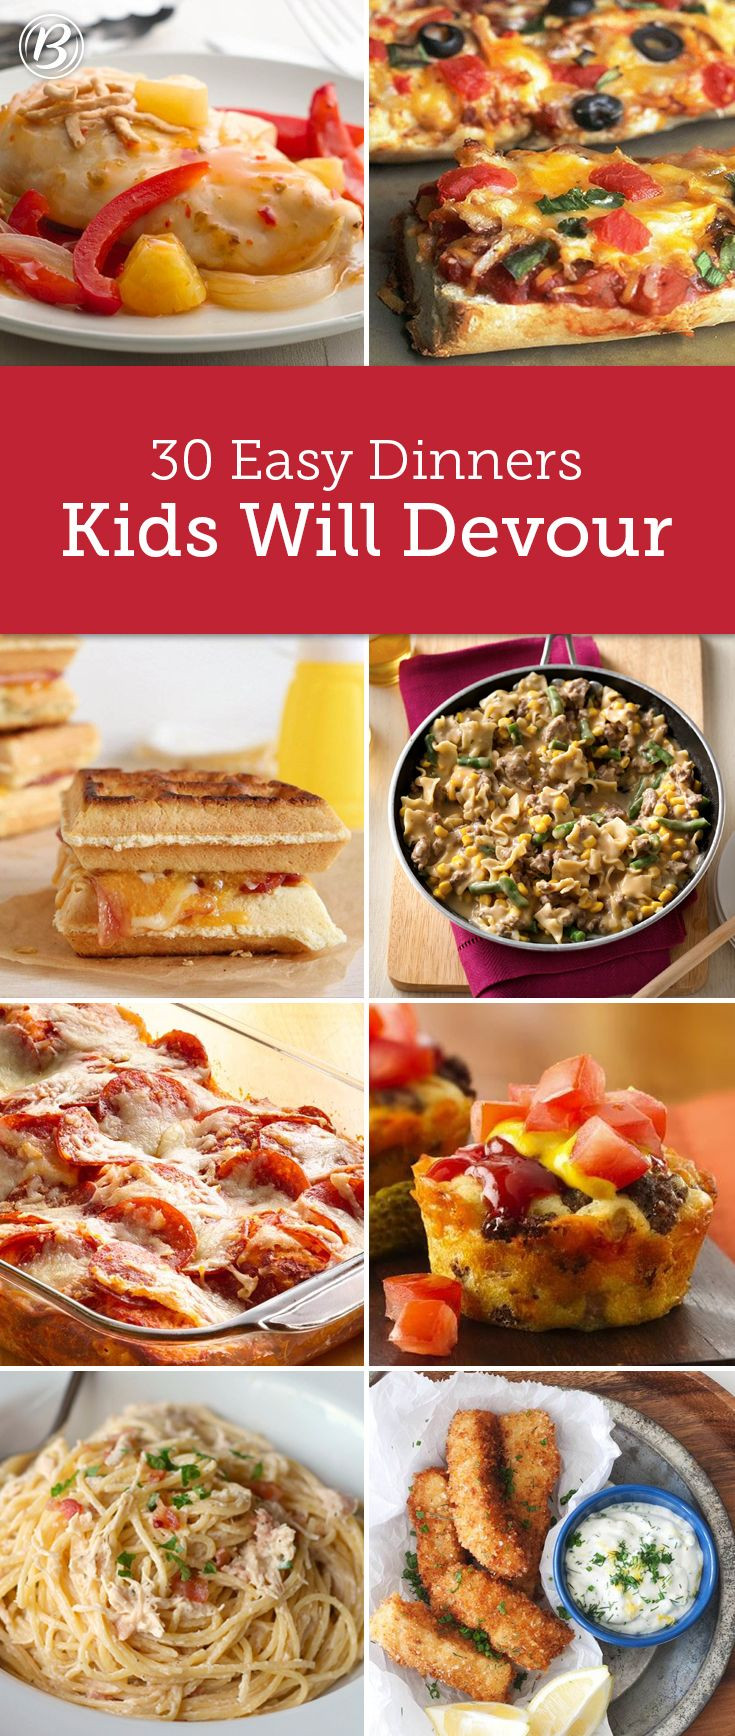 Kid Friendly Dinners
 Kids’ Most Requested Dinners